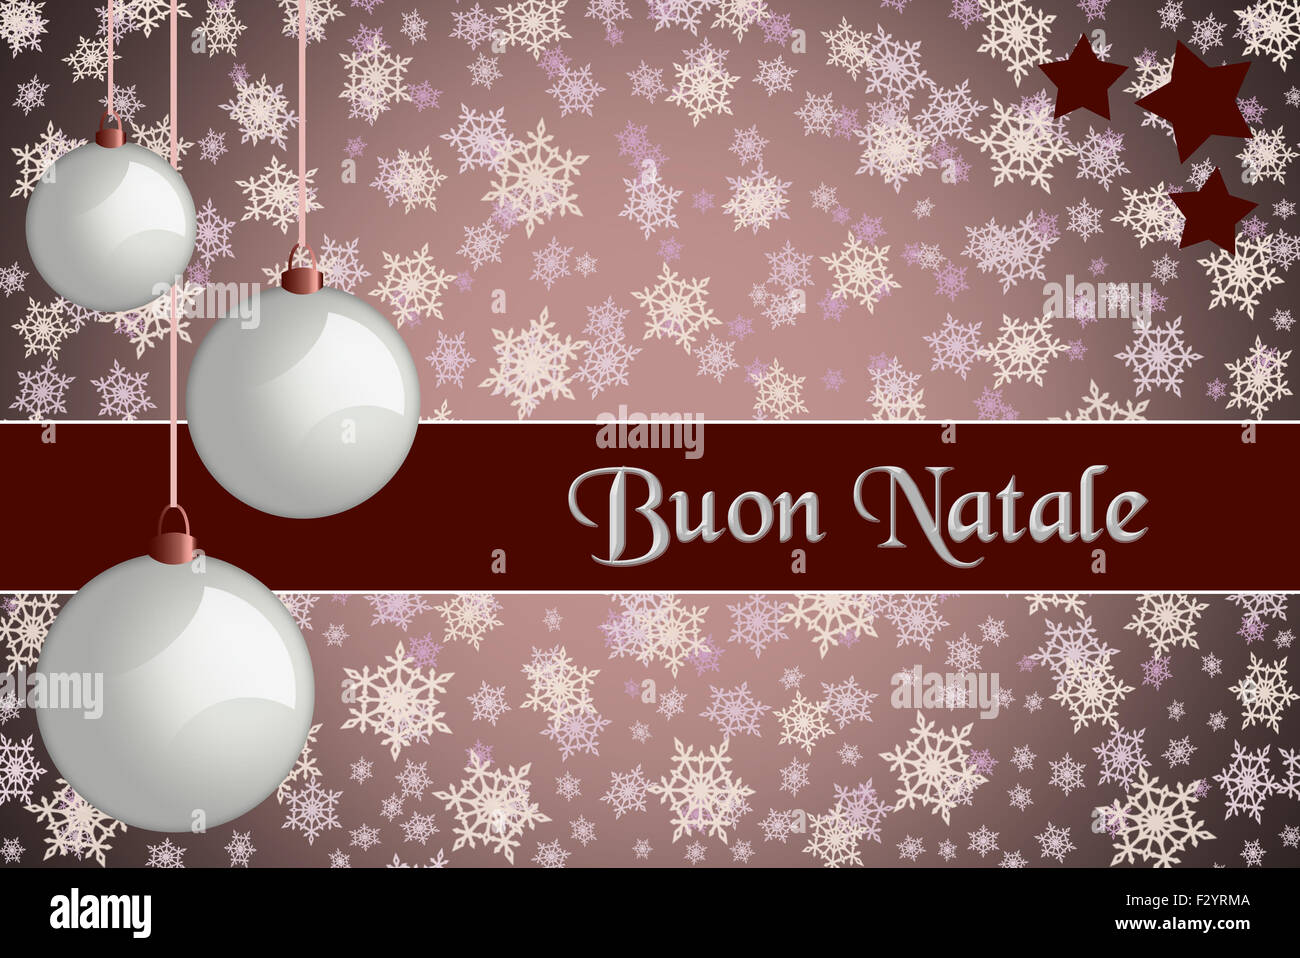 Christmas greeting card. 'Buon Natale' Red colored Christmas card with retro white baubles and snowflake background. Stock Photo